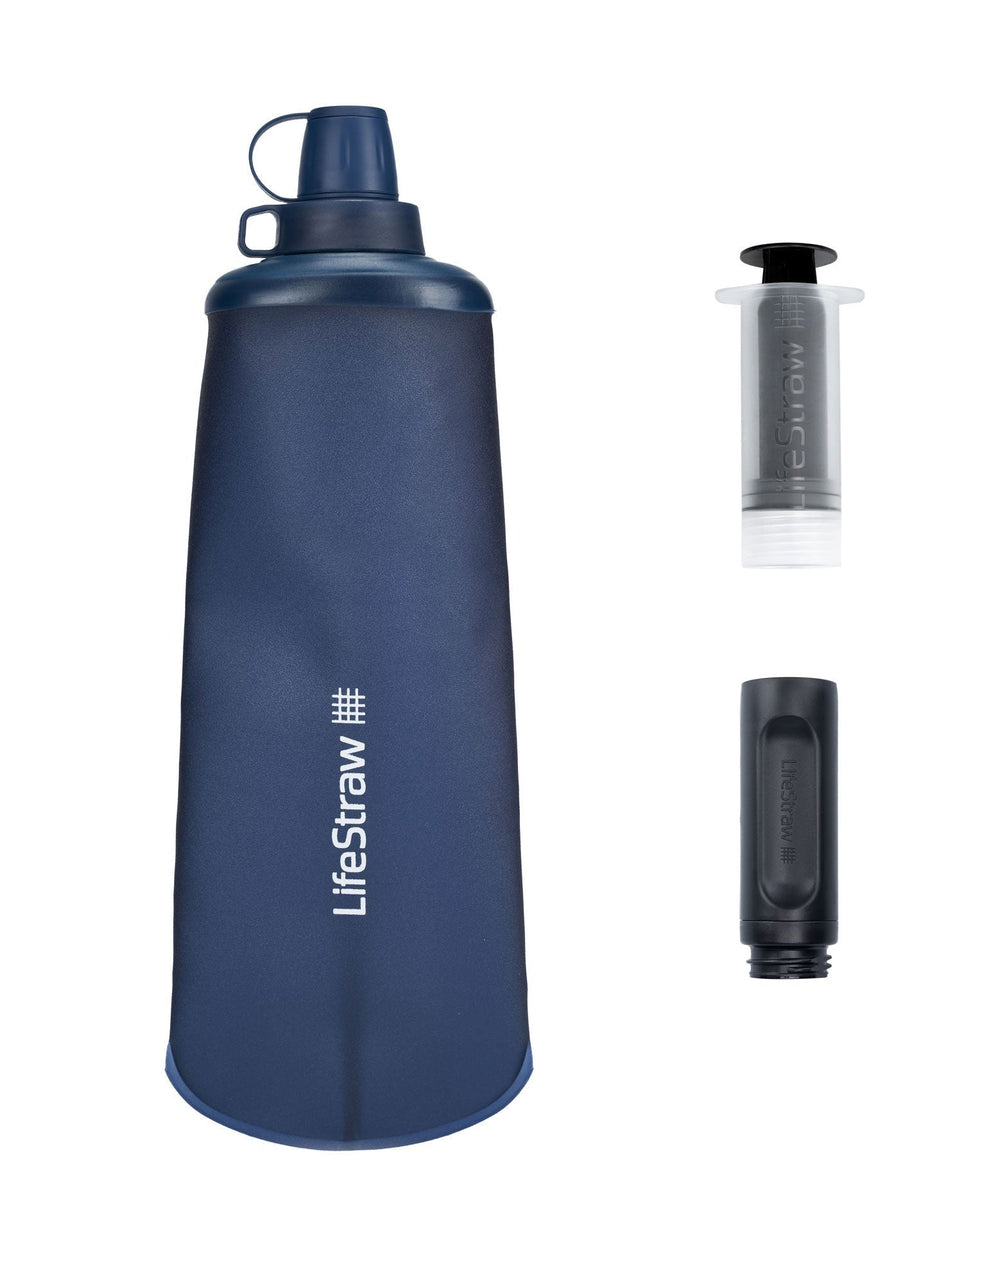 LifeStraw Go 1L Water Filter Bottle for Hiking, Travel, School and  Emergency Prep, Gray 